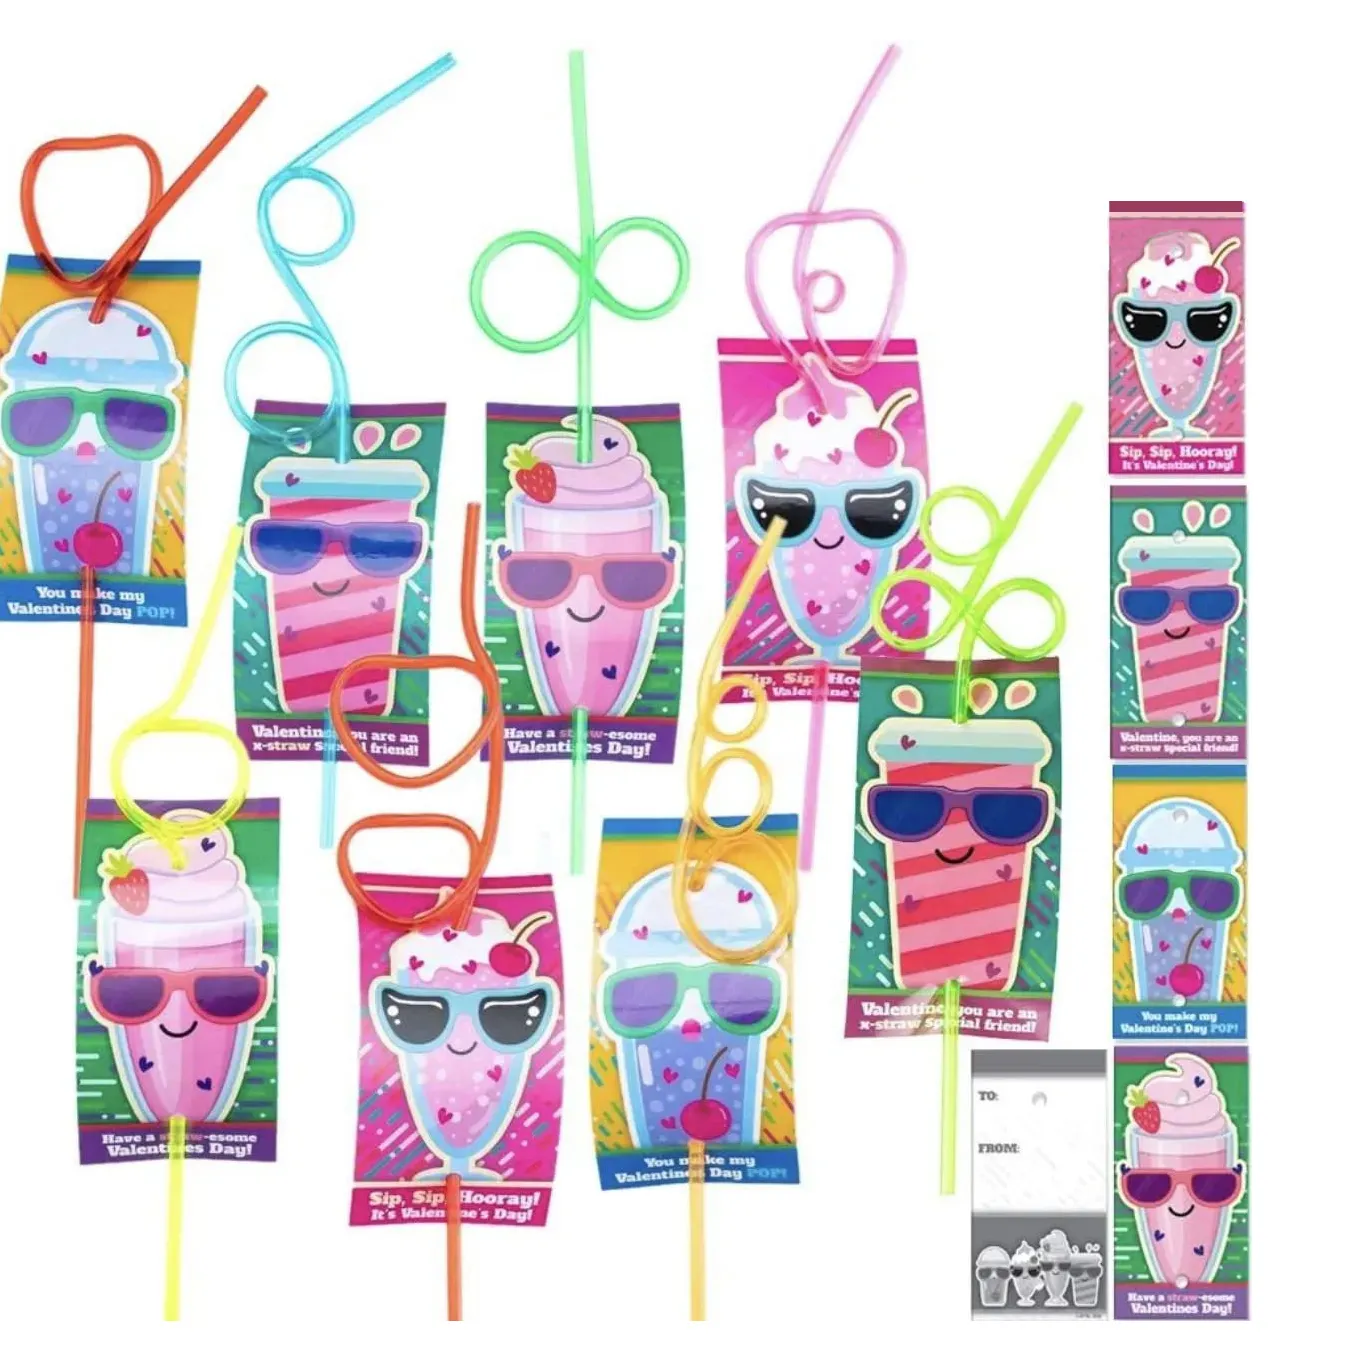 https://www.joyfy.com/wp-content/uploads/2021/11/Valentines-Day-Gift-Cards-With-Colorful-Loop-Reusable-Drinking-Straws_result.webp